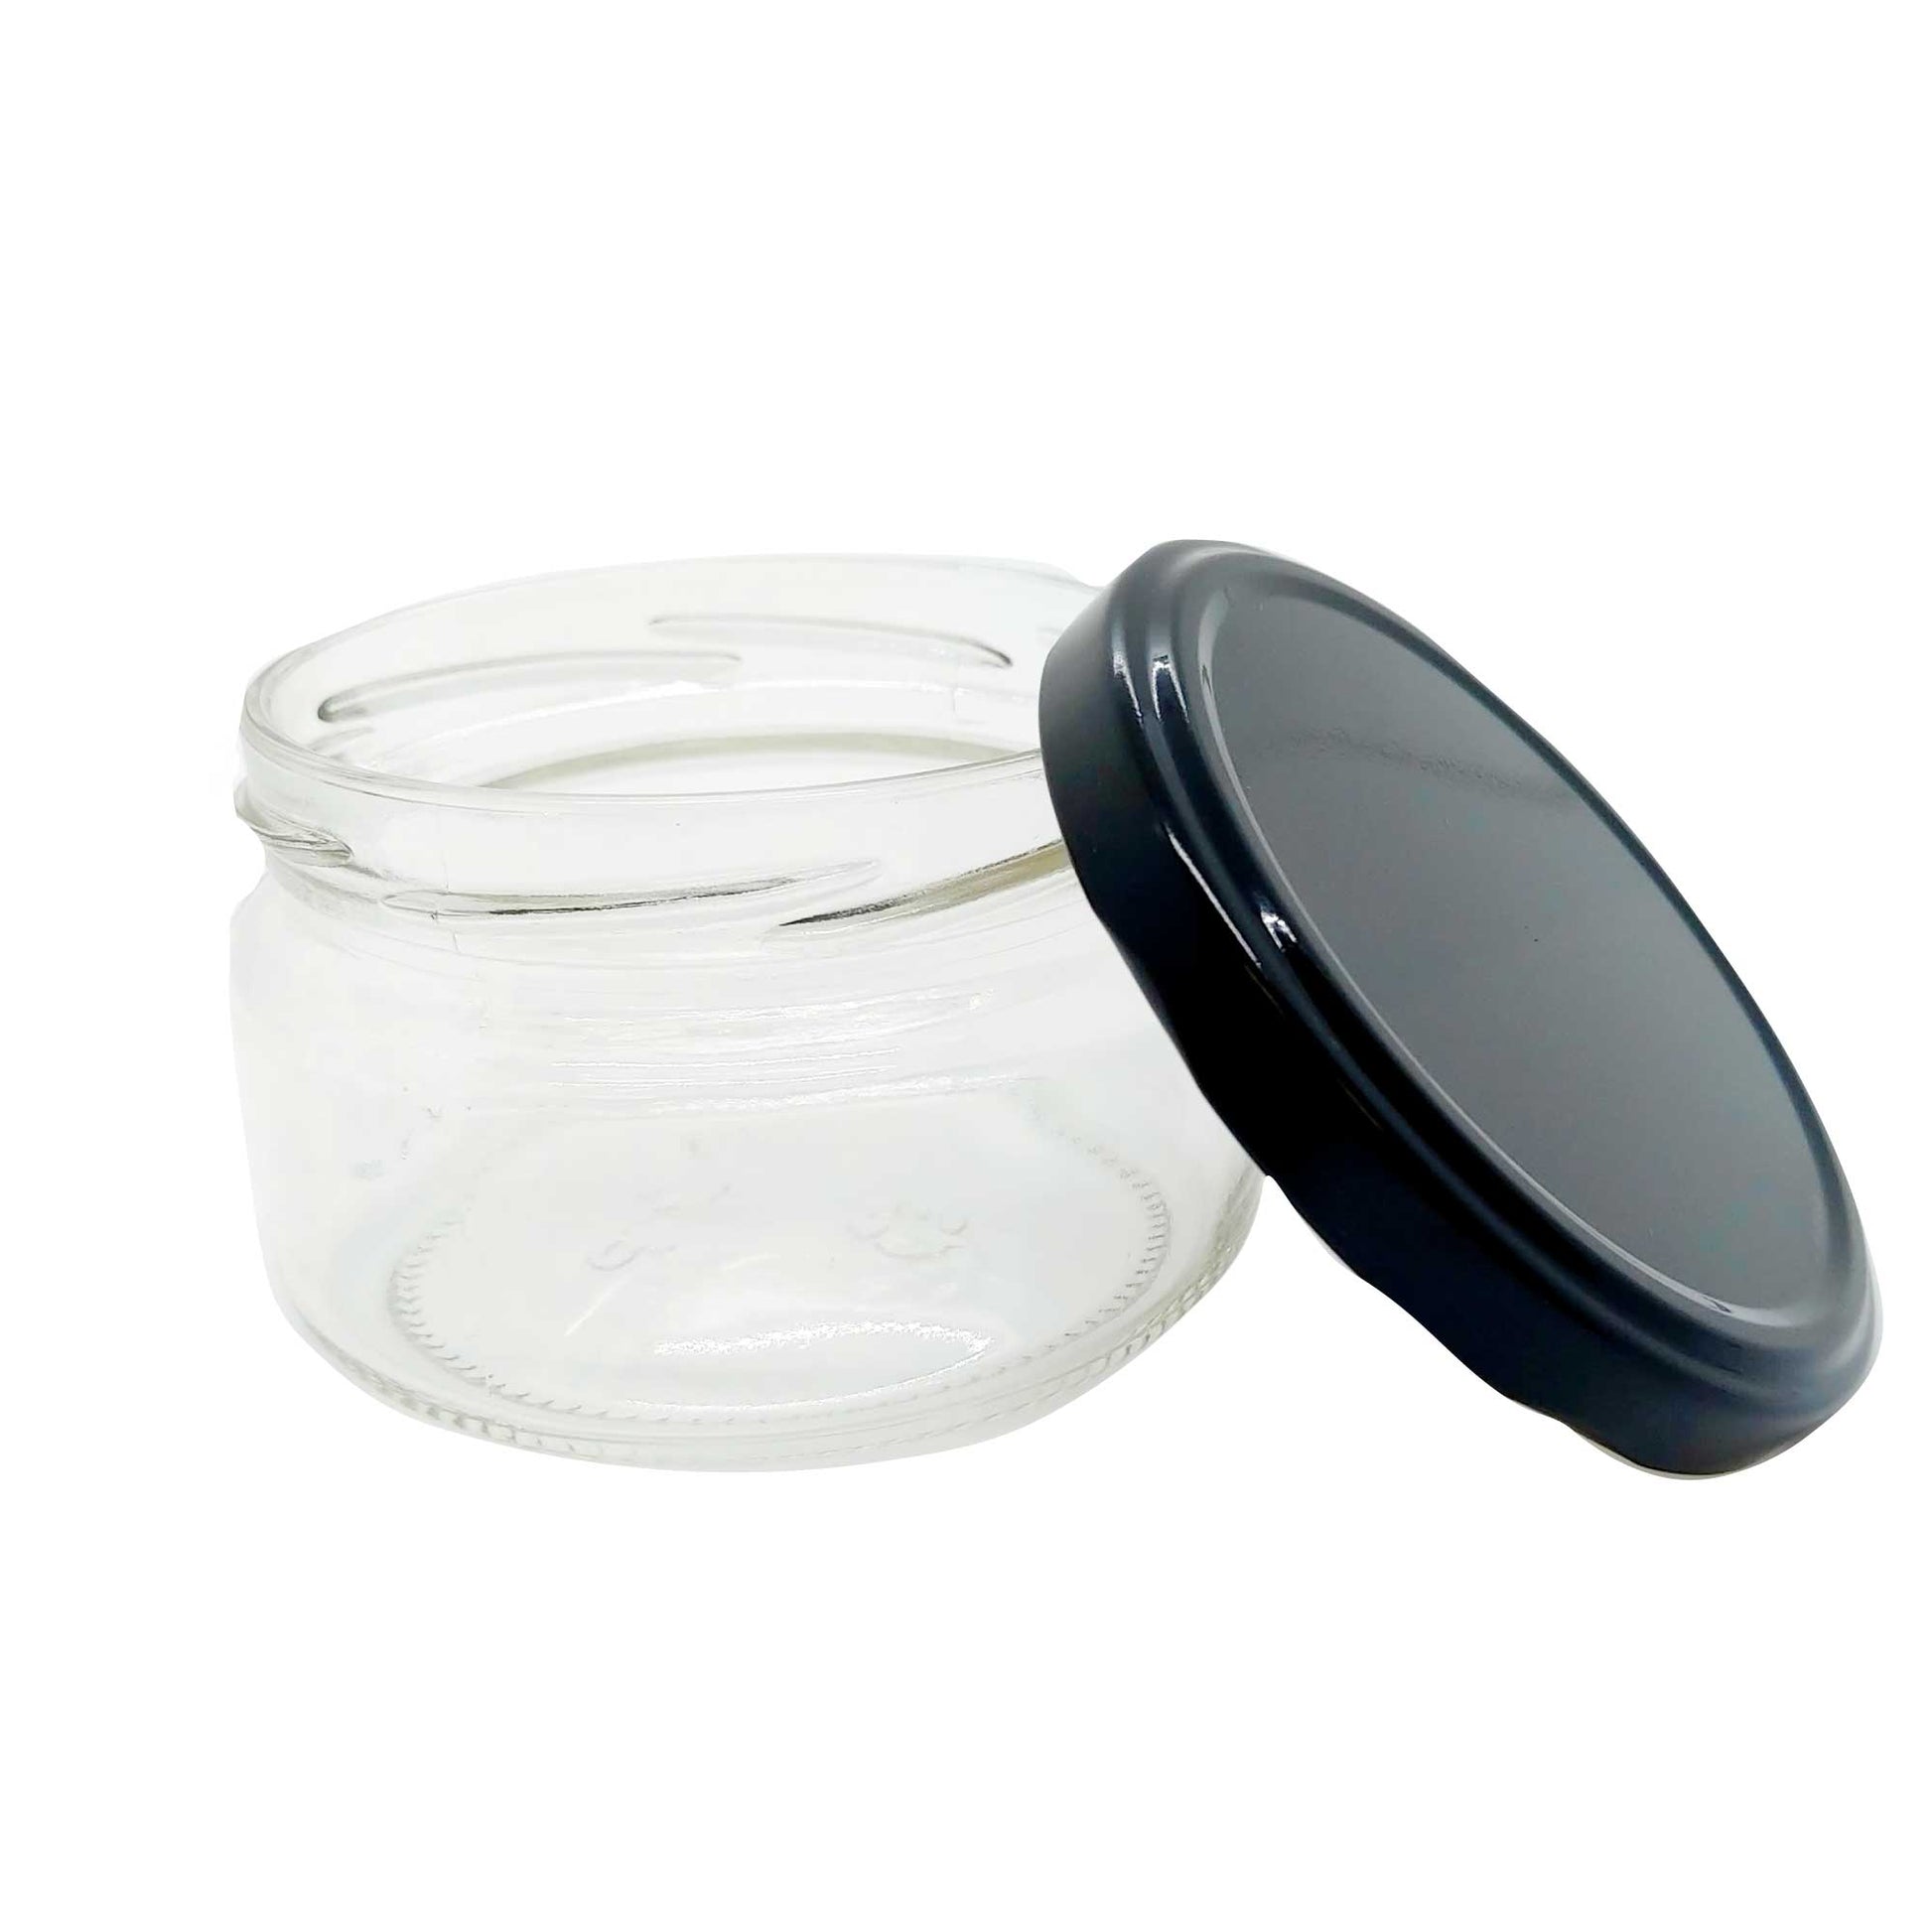 10x 300ml Flint Glass Jars + Twist Lids - Round Food Cosmetic Packing Containers